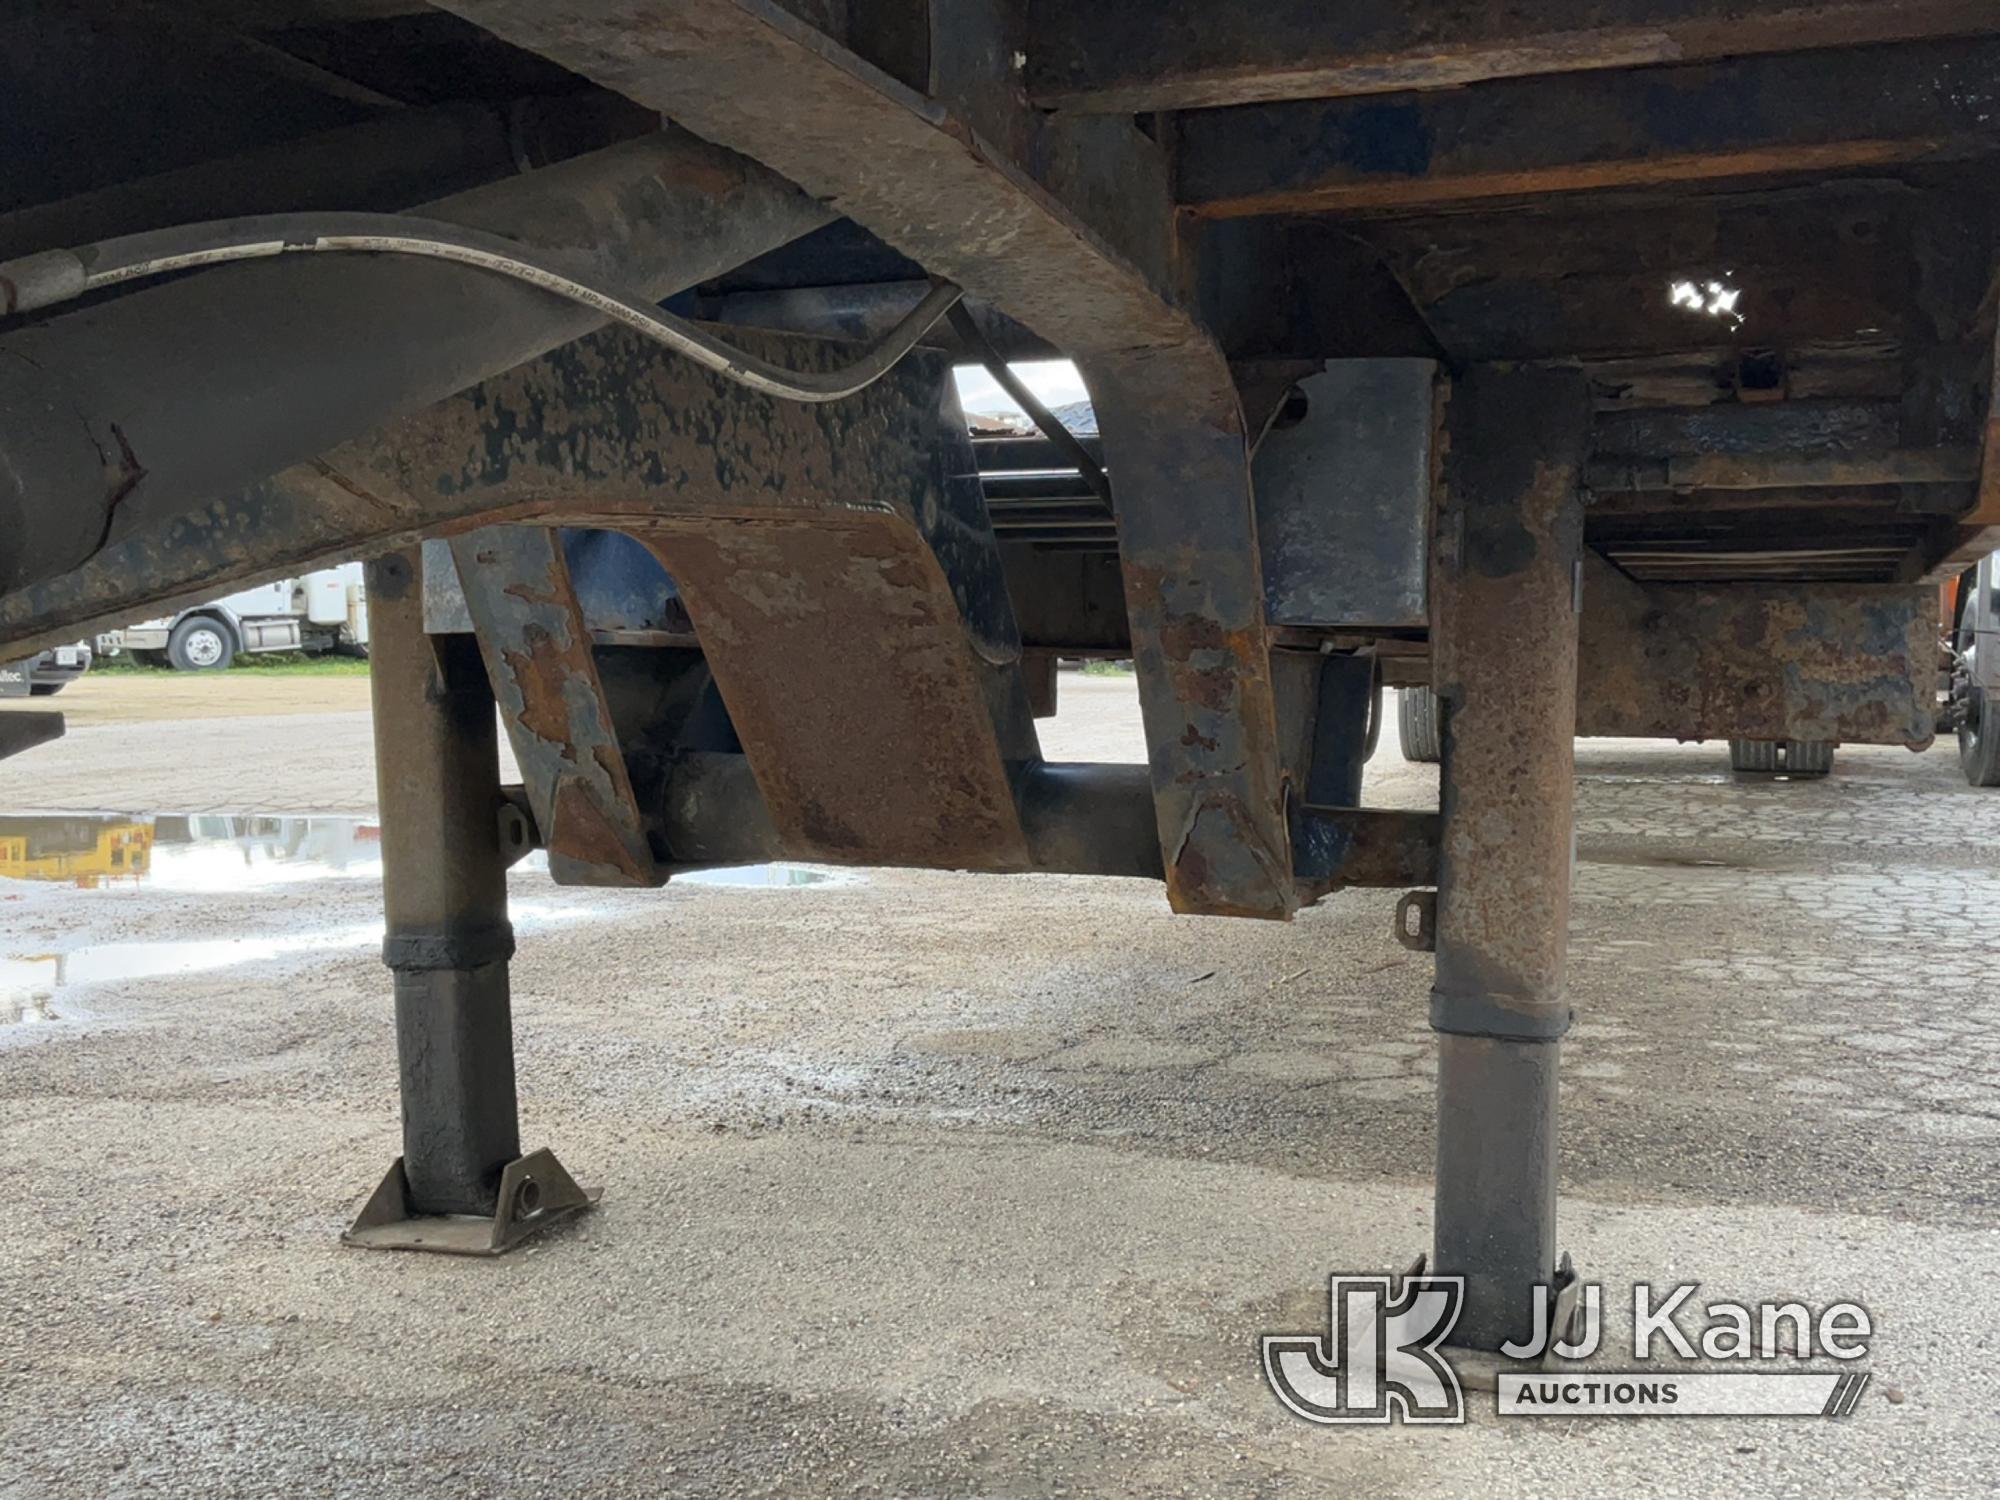 (South Beloit, IL) 2012 Landoll 330C S/A Traveling Axle Container Trailer Condition Unknown